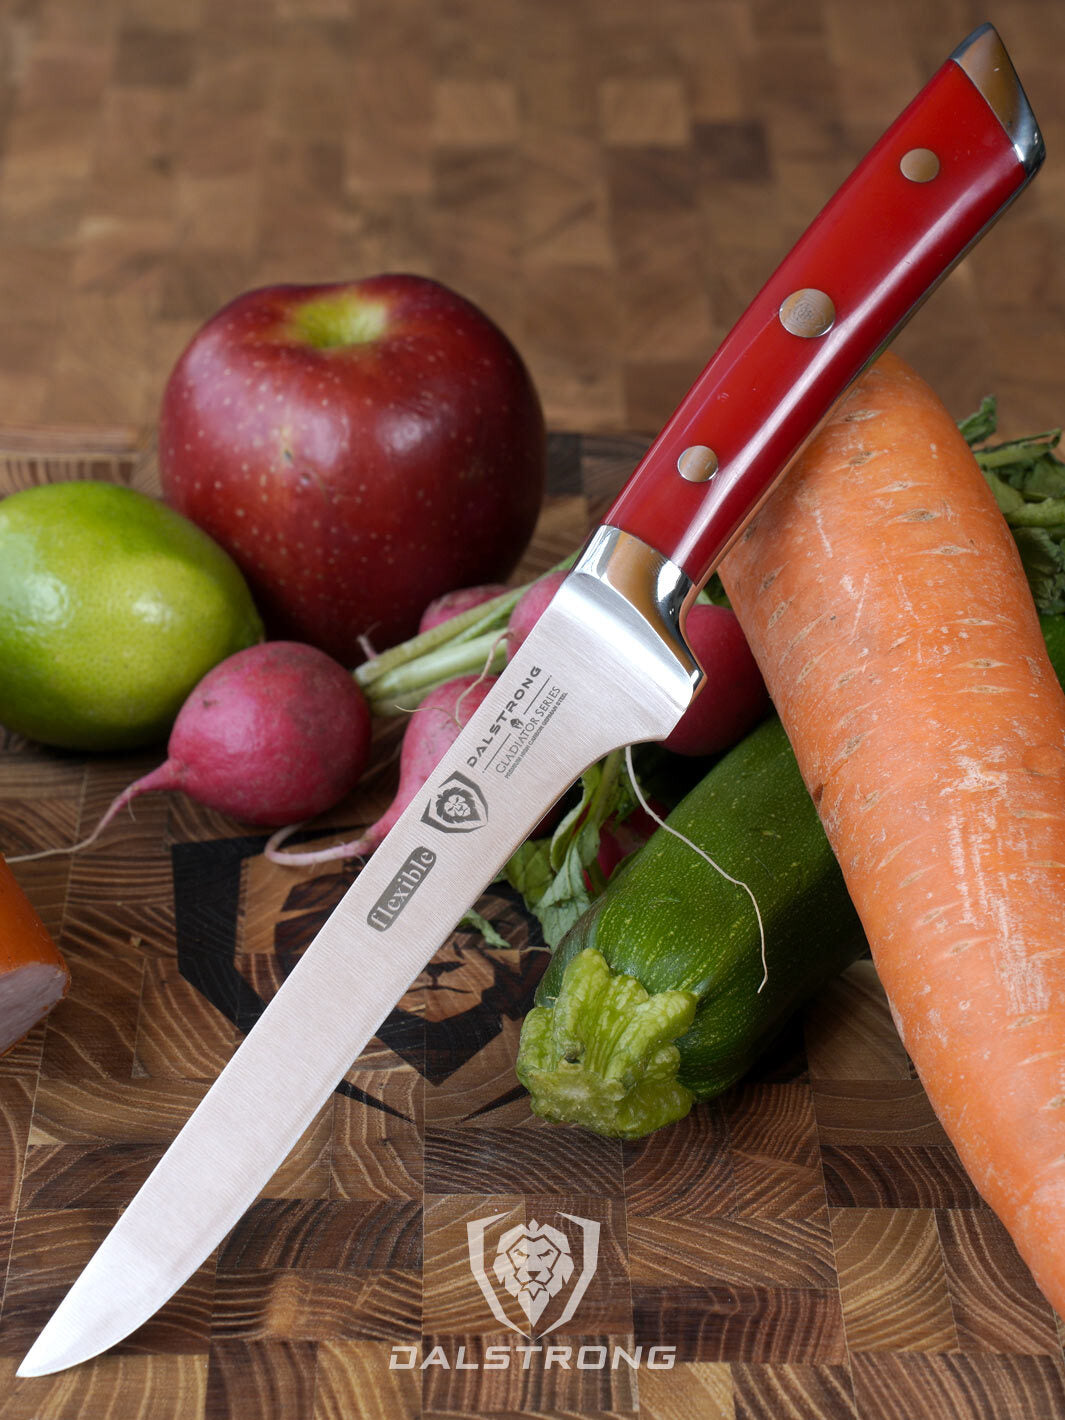 Dalstrong gladiator series 6 inch boning knife with red handle and vegetables.